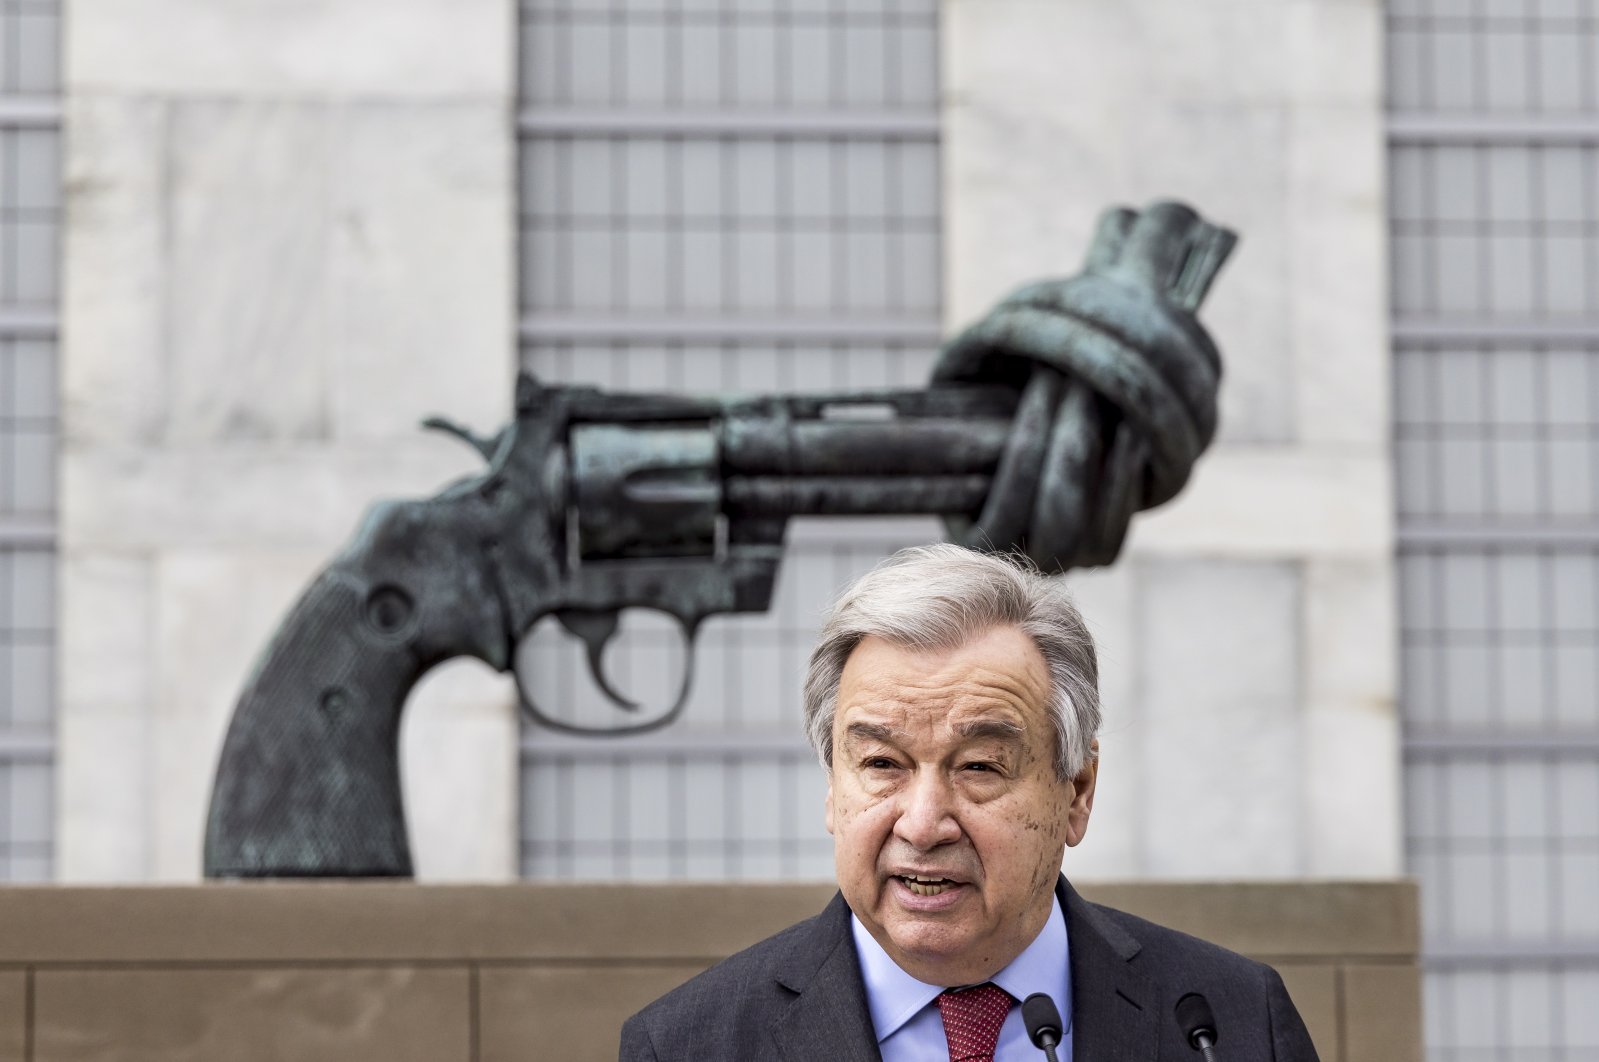 U.N. Secretary-General Antonio Guterres makes a statement calling for a cease-fire in the fighting between Russia and Ukraine outside United Nations headquarters, New York, U.S., April 19, 2022. (EPA Photo)